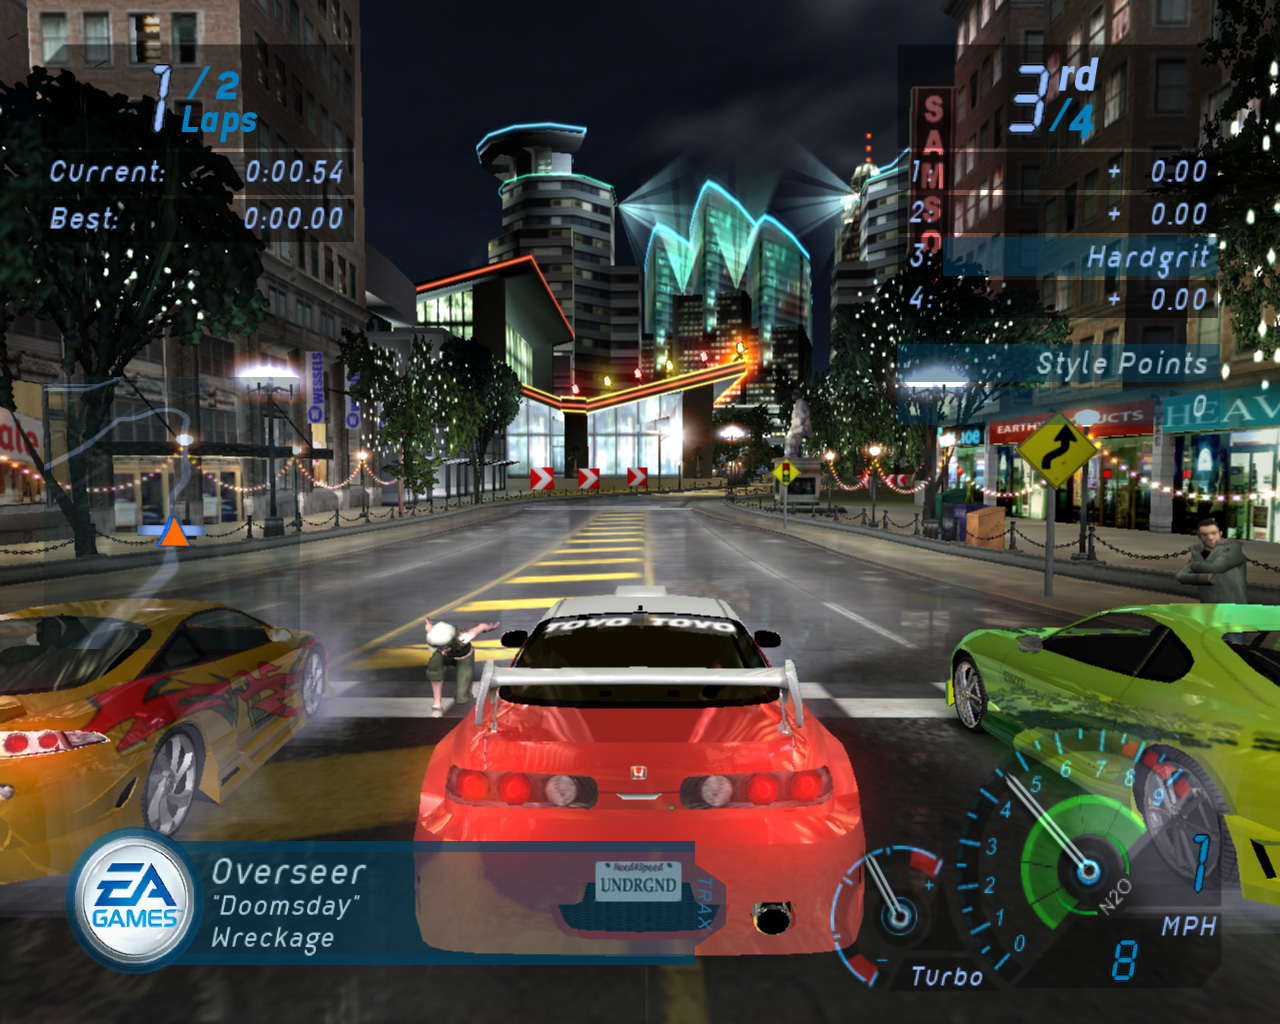 Need for Speed: Underground (Video Game) - TV Tropes